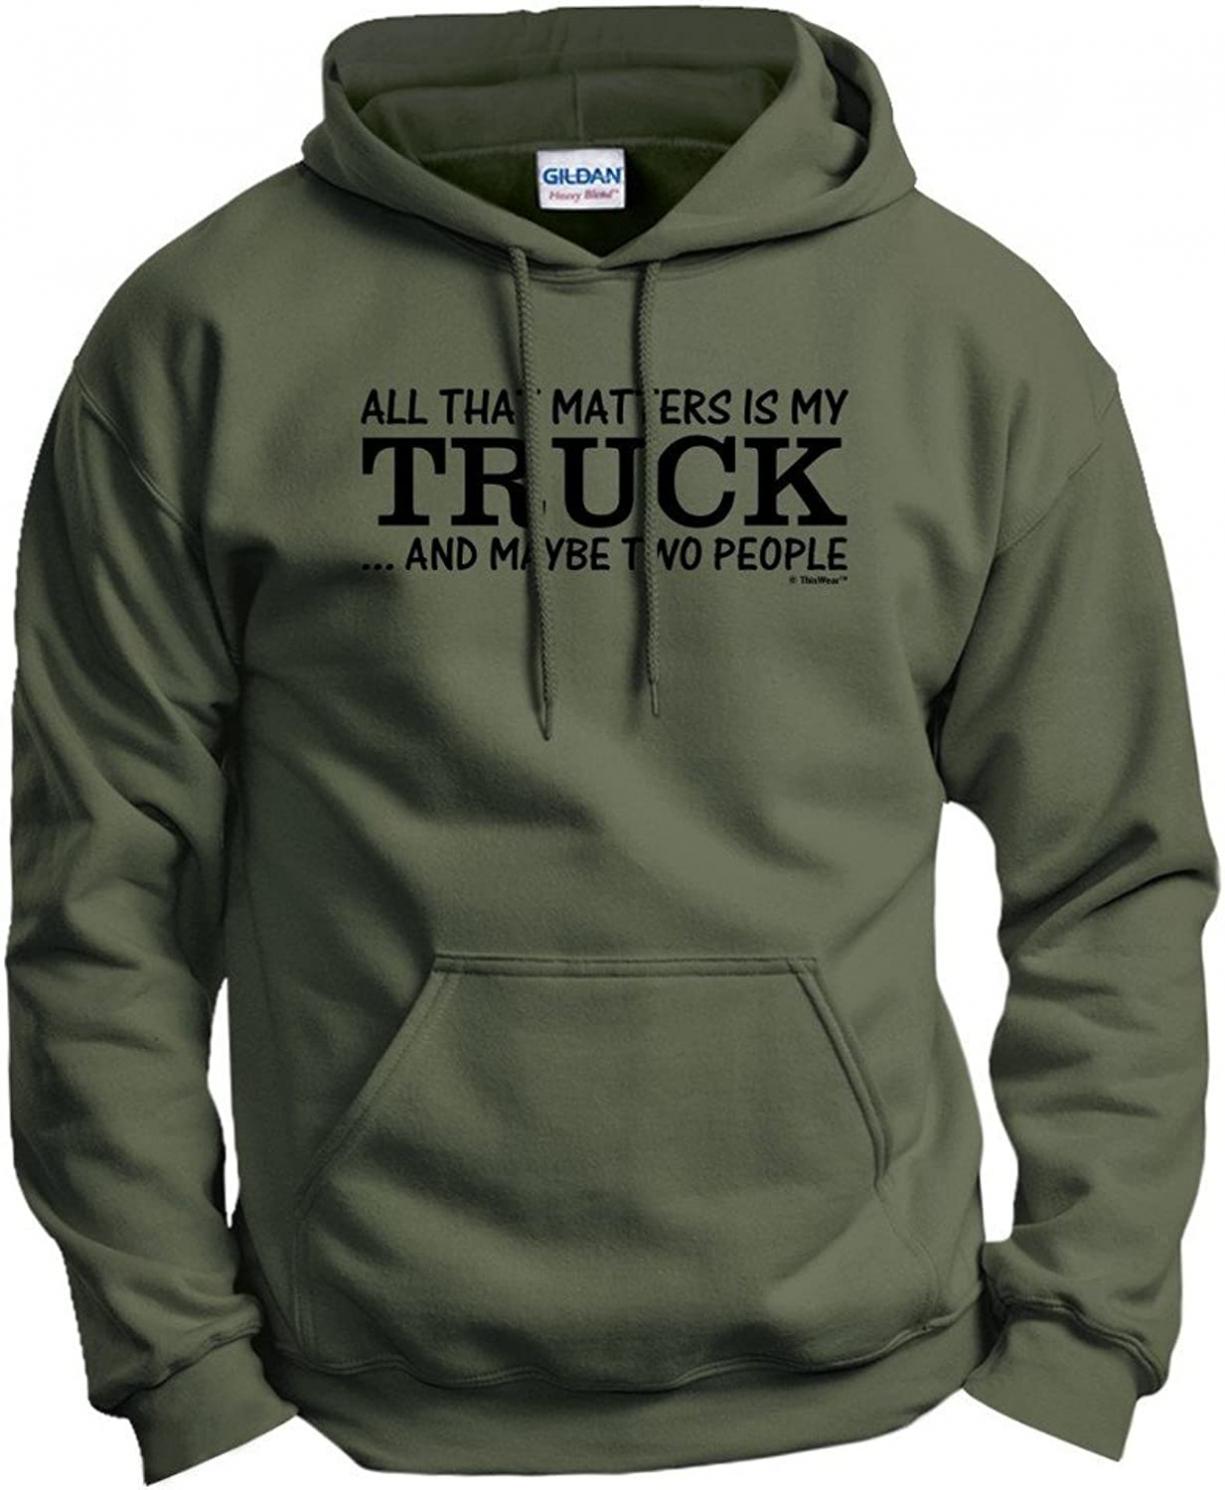 My Truck That's All That Matters Maybe Two People Hoodie Sweatshirt